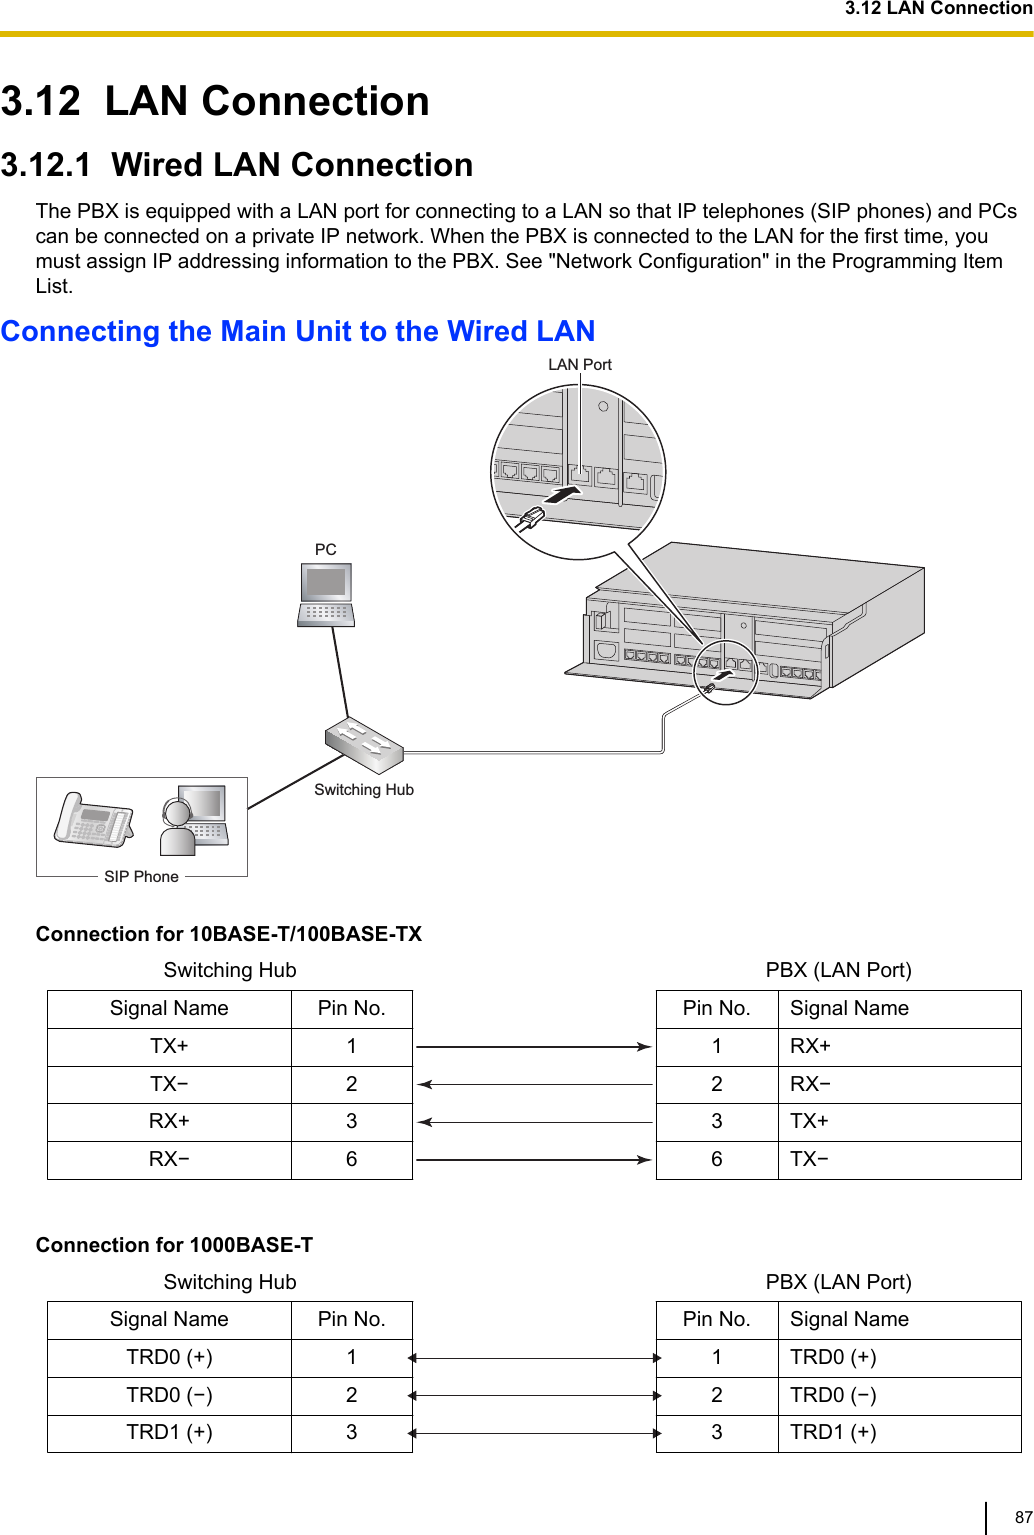 3.12  LAN Connection3.12.1  Wired LAN ConnectionThe PBX is equipped with a LAN port for connecting to a LAN so that IP telephones (SIP phones) and PCscan be connected on a private IP network. When the PBX is connected to the LAN for the first time, youmust assign IP addressing information to the PBX. See &quot;Network Configuration&quot; in the Programming ItemList.Connecting the Main Unit to the Wired LANSIP PhoneSwitching HubLAN PortPCConnection for 10BASE-T/100BASE-TX  Switching Hub   PBX (LAN Port)   Signal Name Pin No.  Pin No. Signal Name  TX+ 1 1 RX+TX− 2 2 RX−RX+ 3 3 TX+RX− 6 6 TX−     Connection for 1000BASE-T  Switching Hub   PBX (LAN Port)   Signal Name Pin No.  Pin No. Signal Name  TRD0 (+) 1 1 TRD0 (+)TRD0 (−) 2 2 TRD0 (−)TRD1 (+) 3 3 TRD1 (+)3.12 LAN Connection87